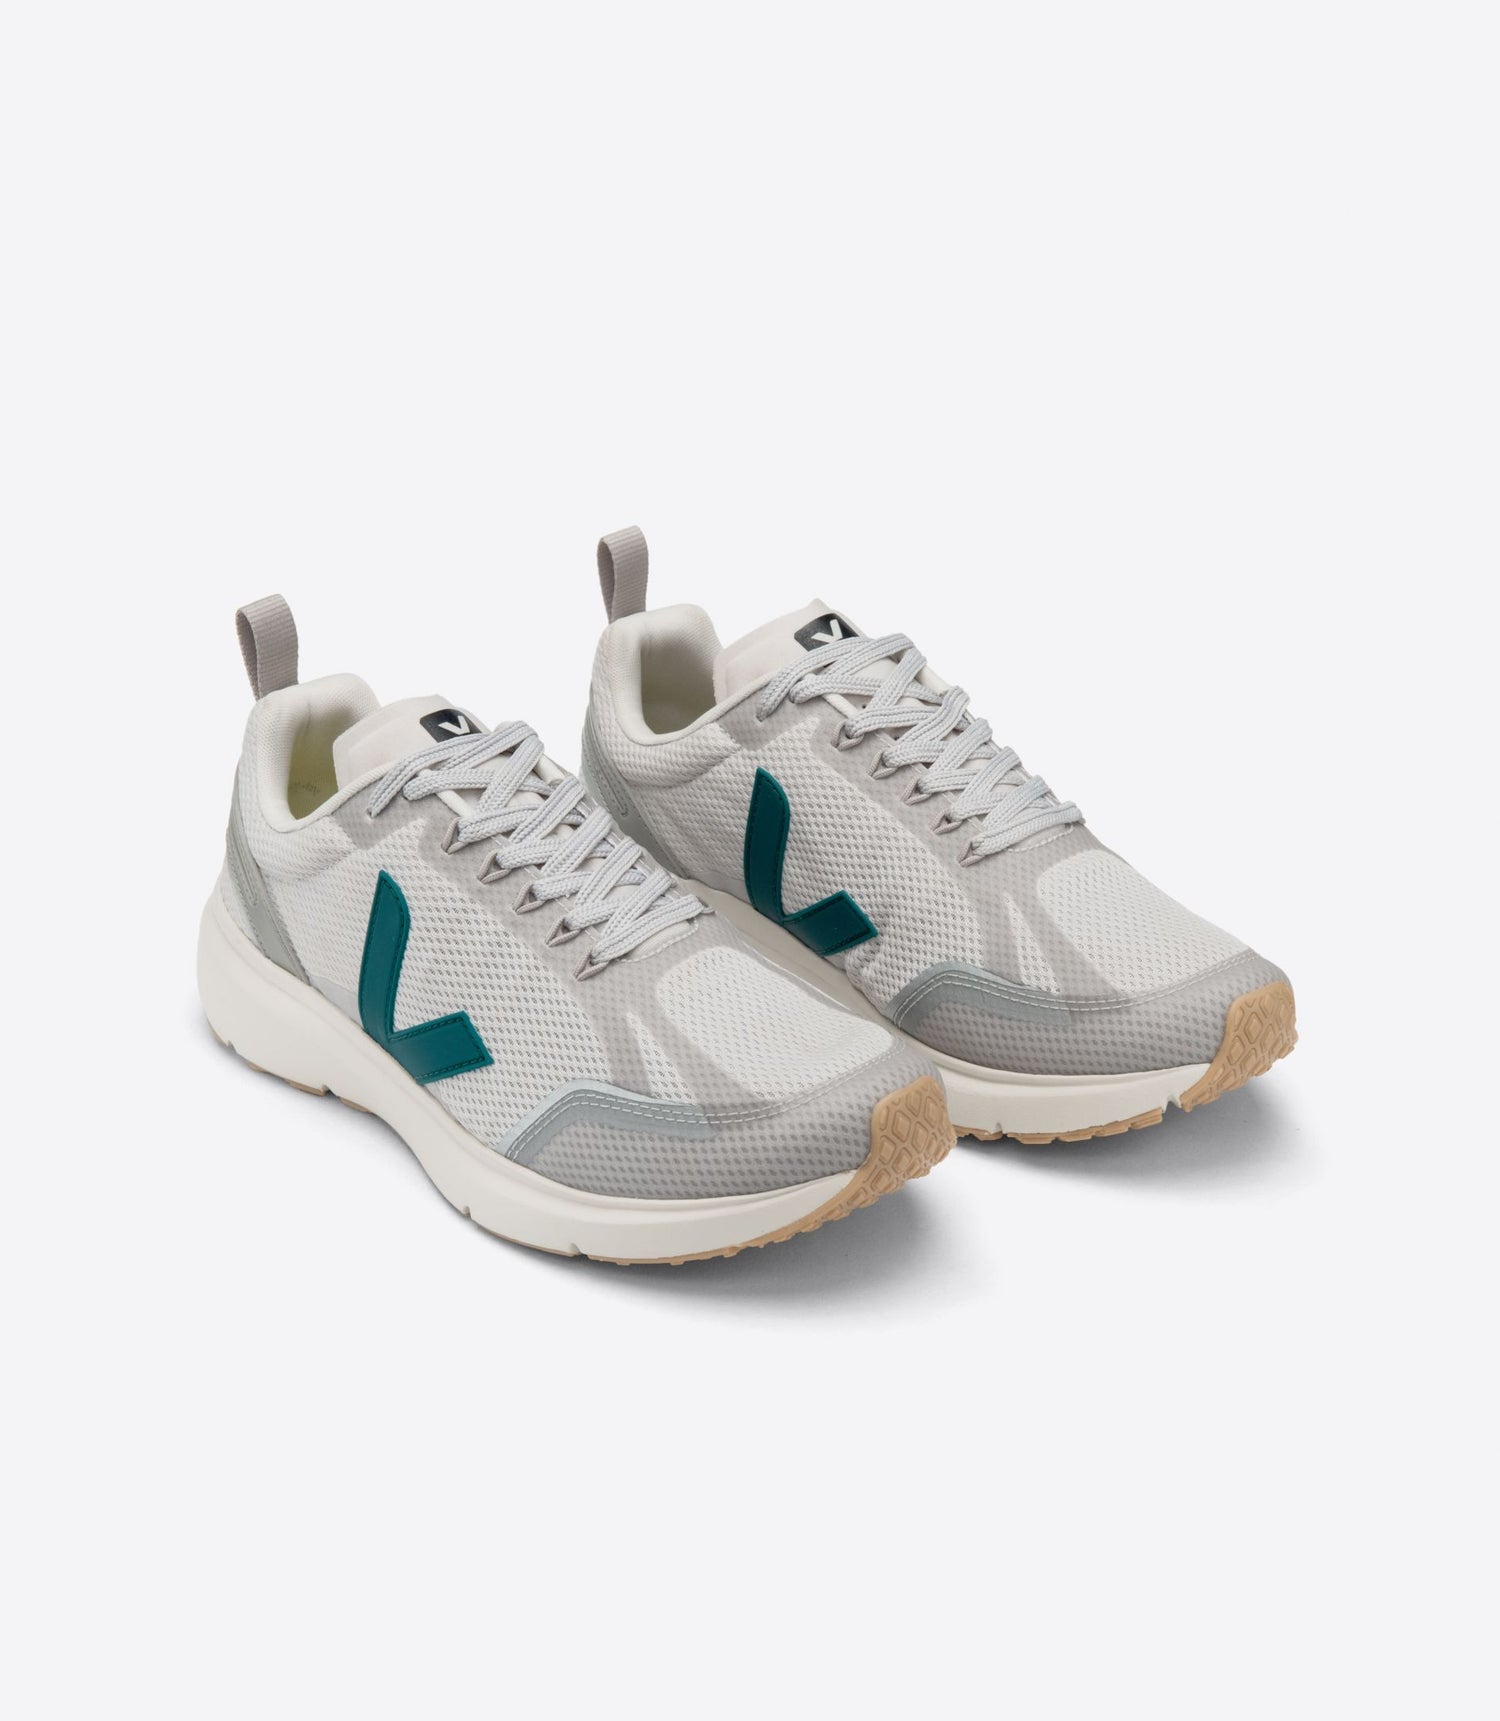 Veja - W's Condor 2 Alveomesh Running Shoes - Recycled Plastic Bottles - Weekendbee - sustainable sportswear